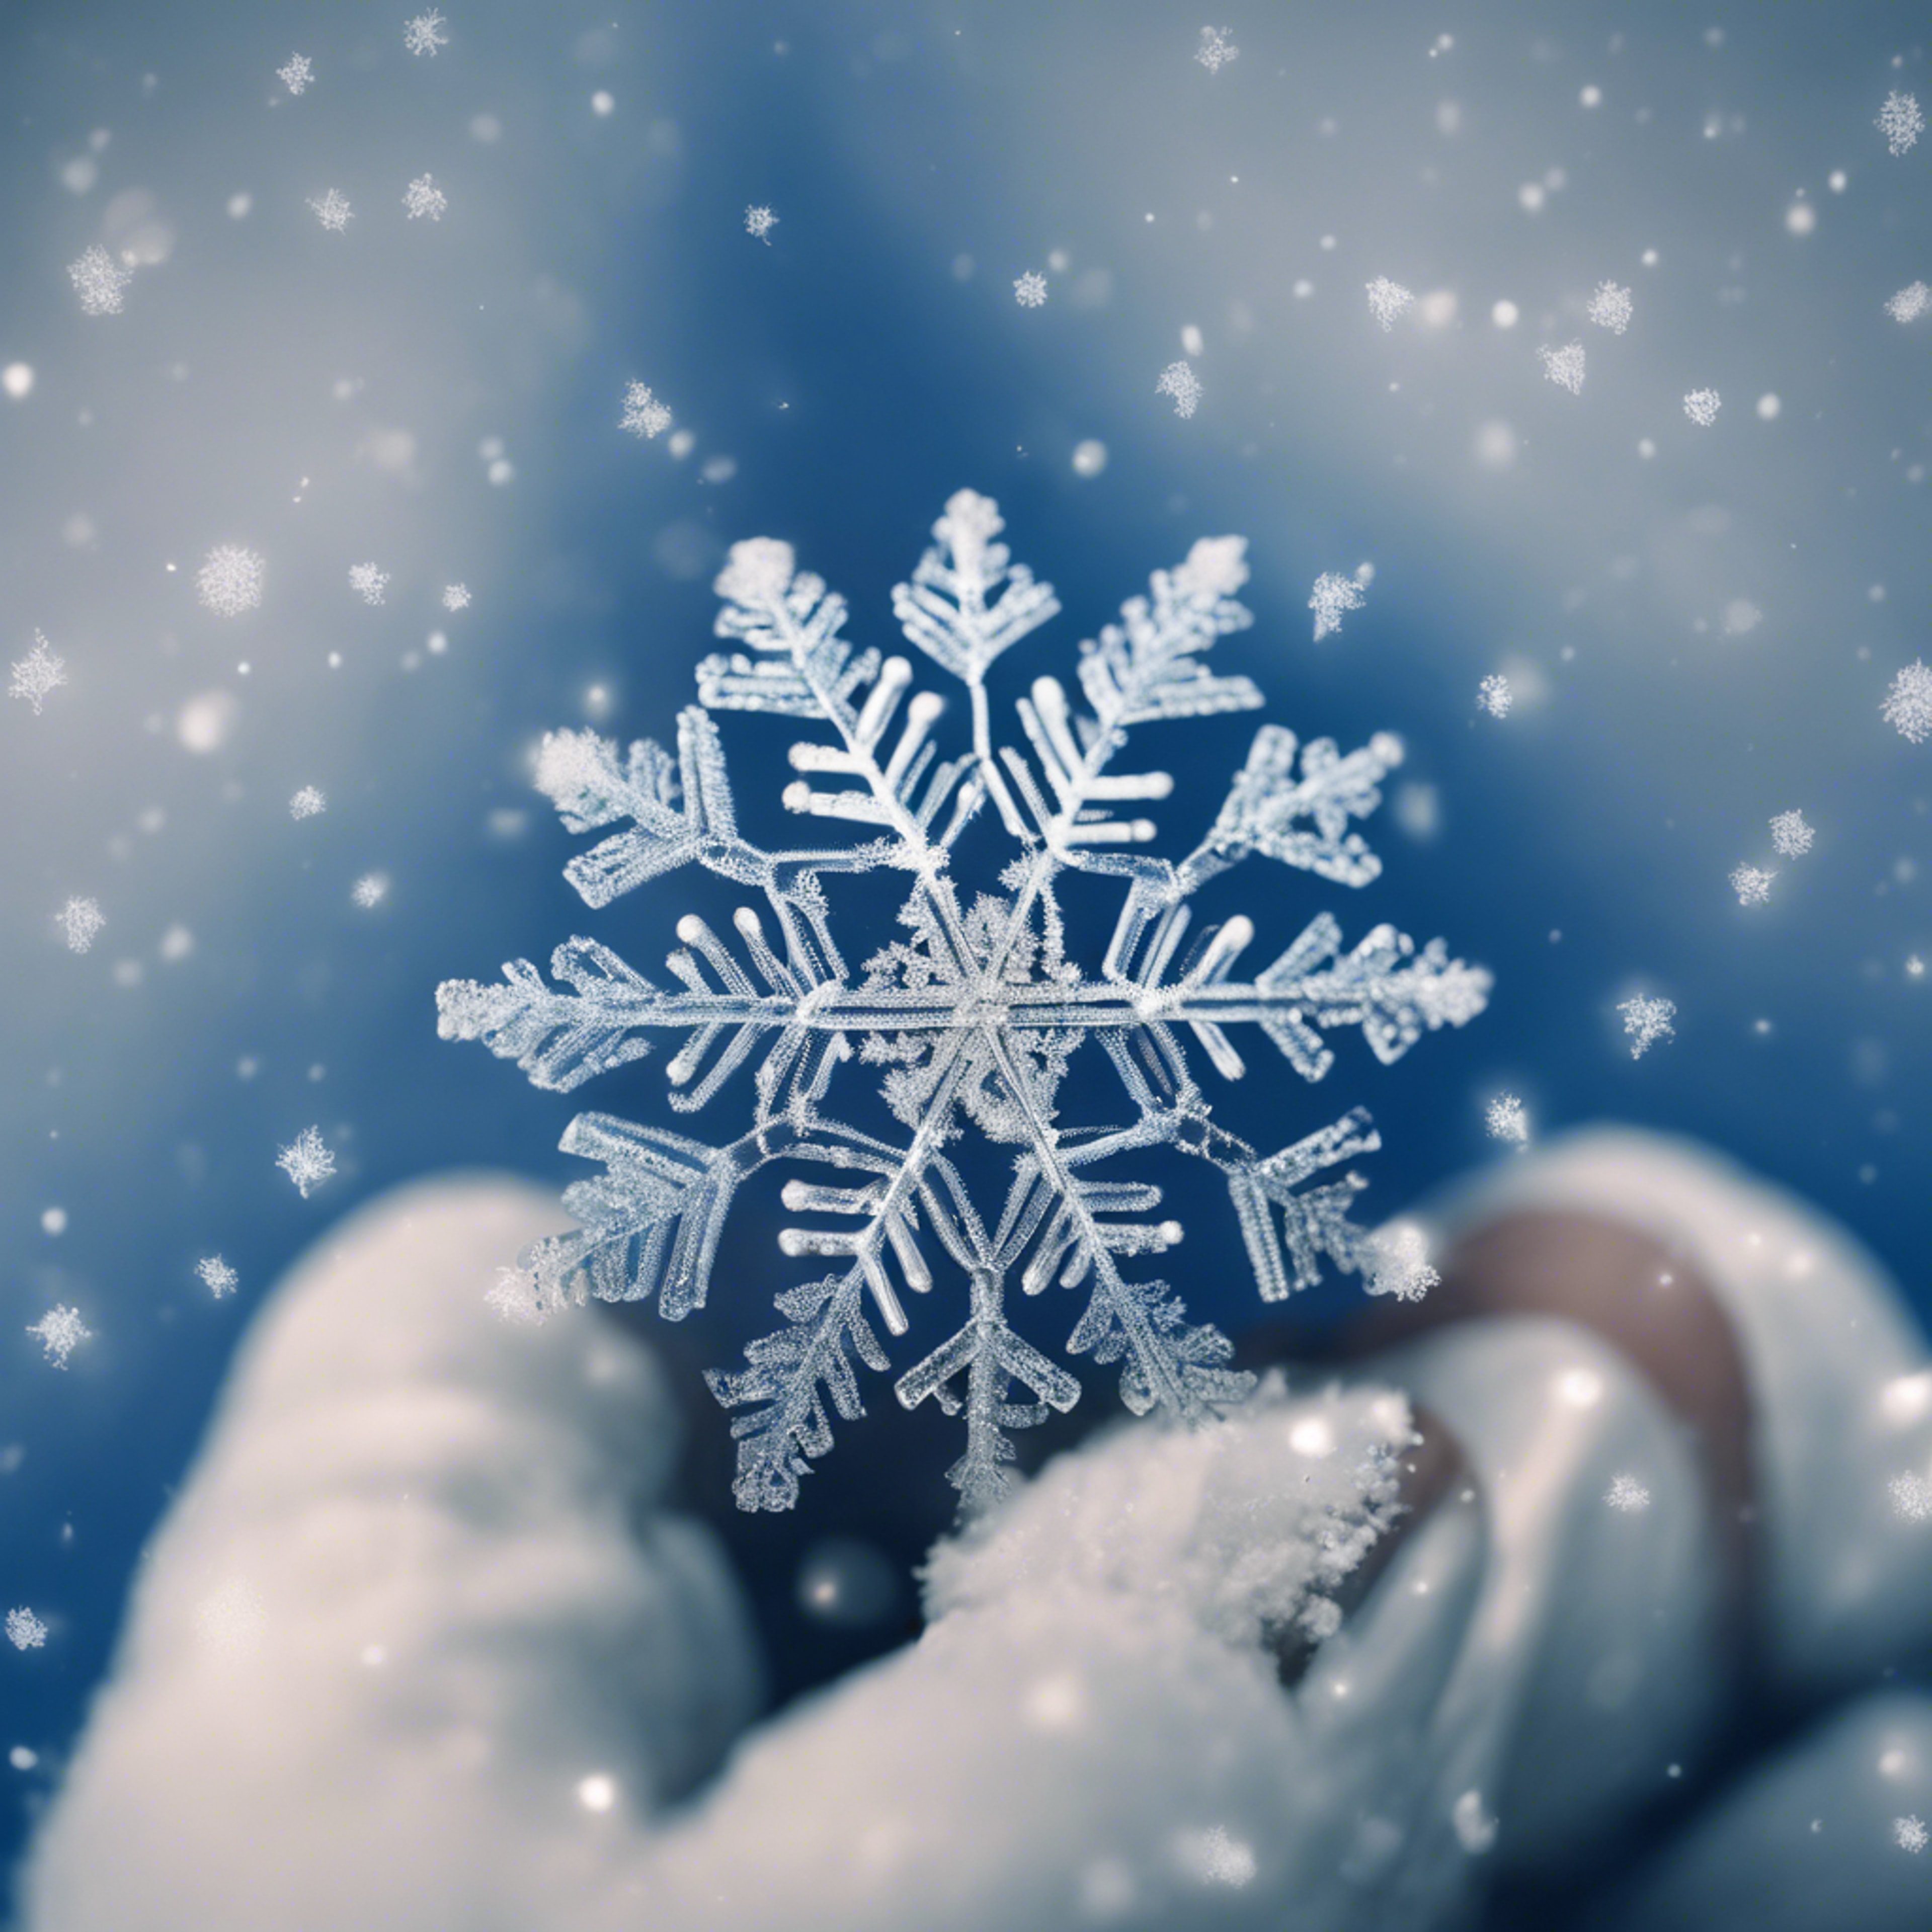 Intricate patterns of a snowflake on a blue gloved finger. Kertas dinding[6c7ed0f3c74b413e9833]